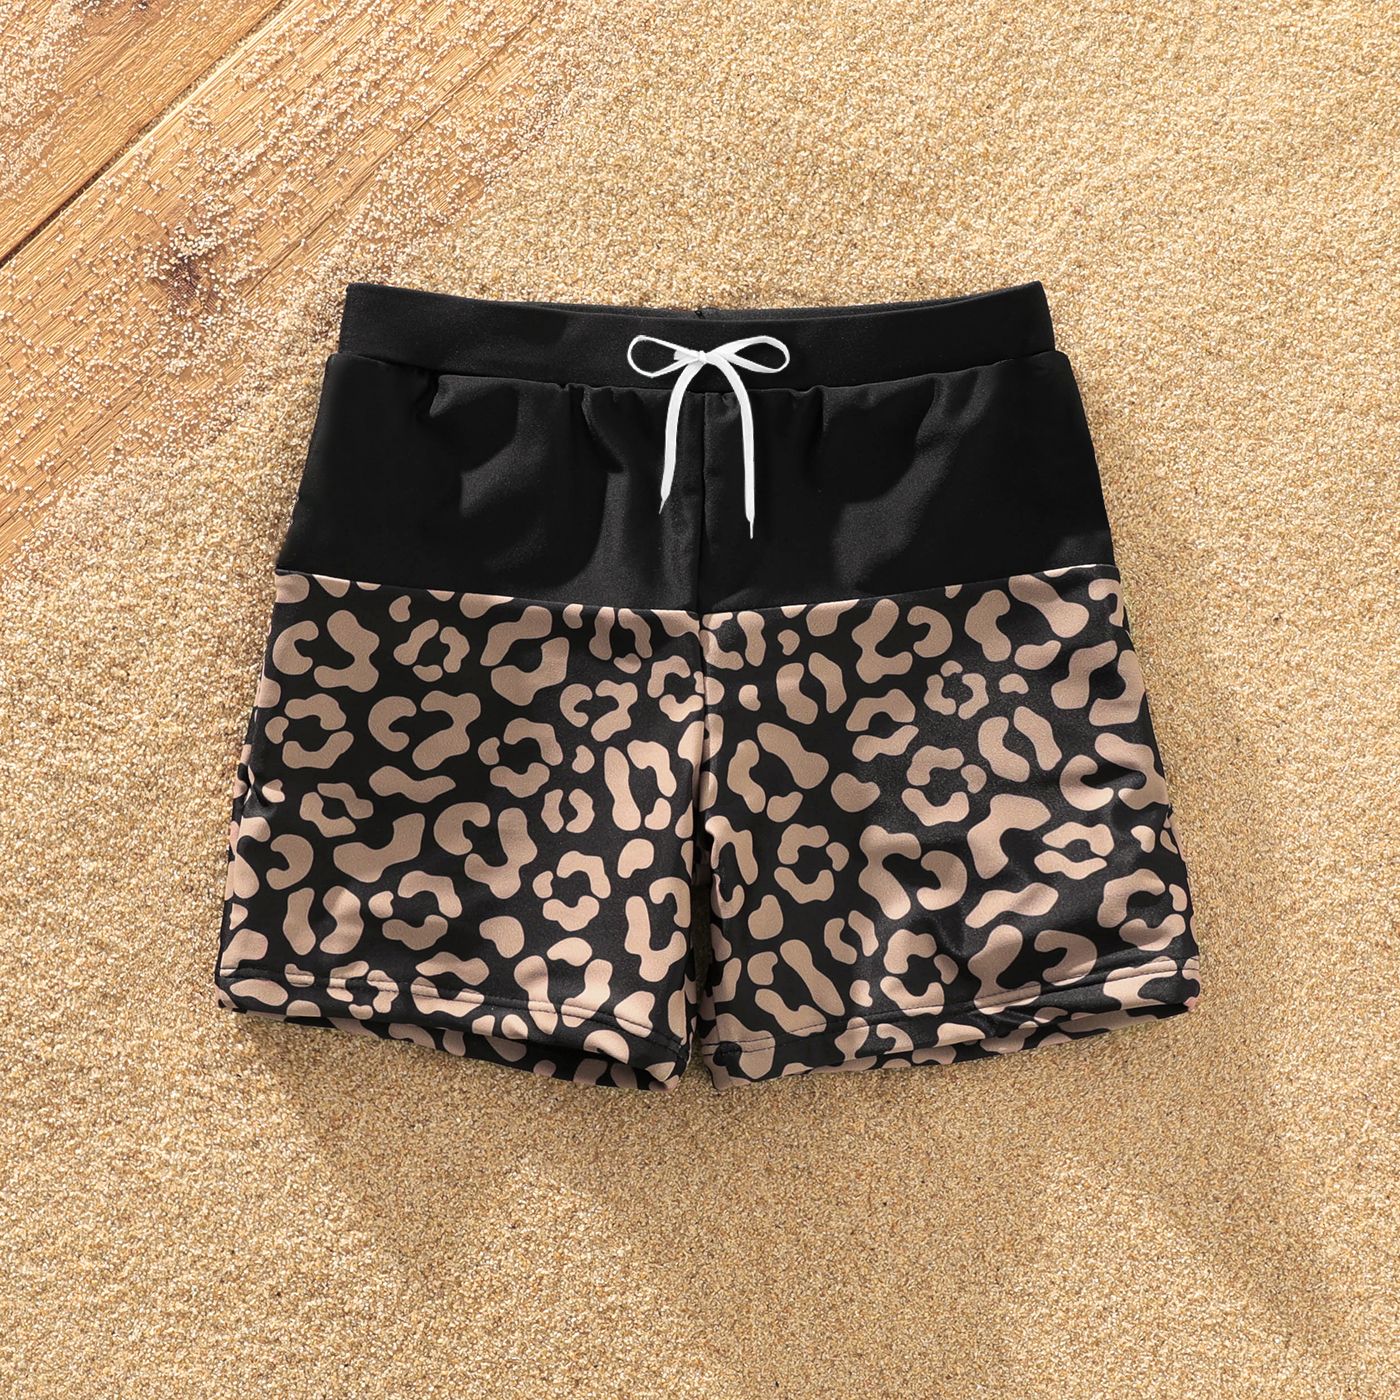 Family Matching Leopard Splice Black Swim Trunks Shorts And One Shoulder Self Tie One-Piece Swimsuit